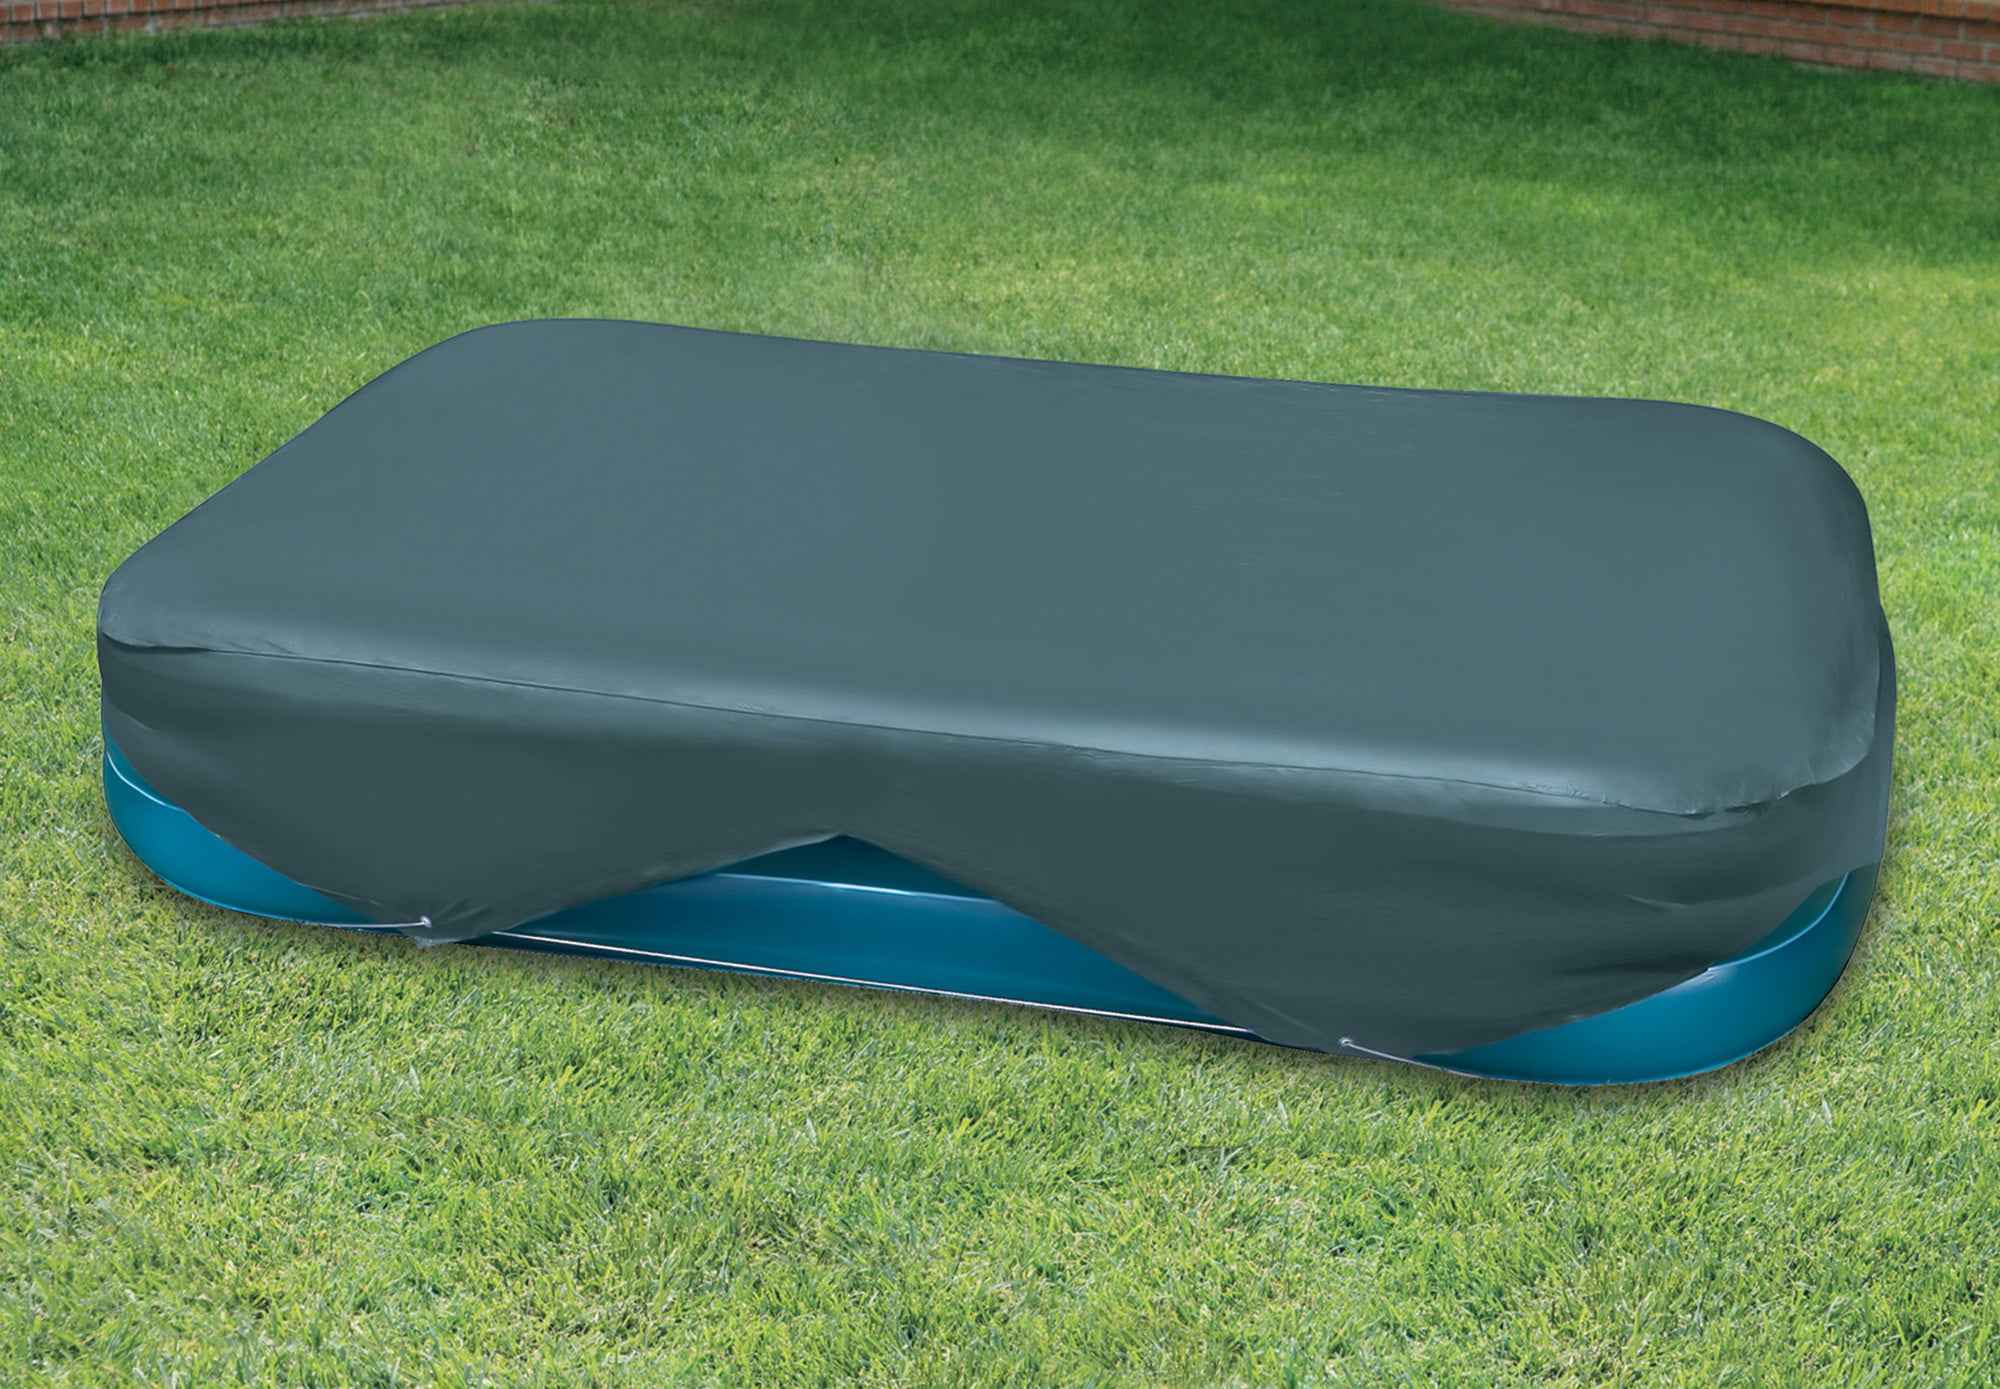 Easy To Use To Prevent Dirt In The Water Fineway.® Durable Deluxe Rectangular Family Swimming Paddling Pool Cover 120 x 72 x 20 